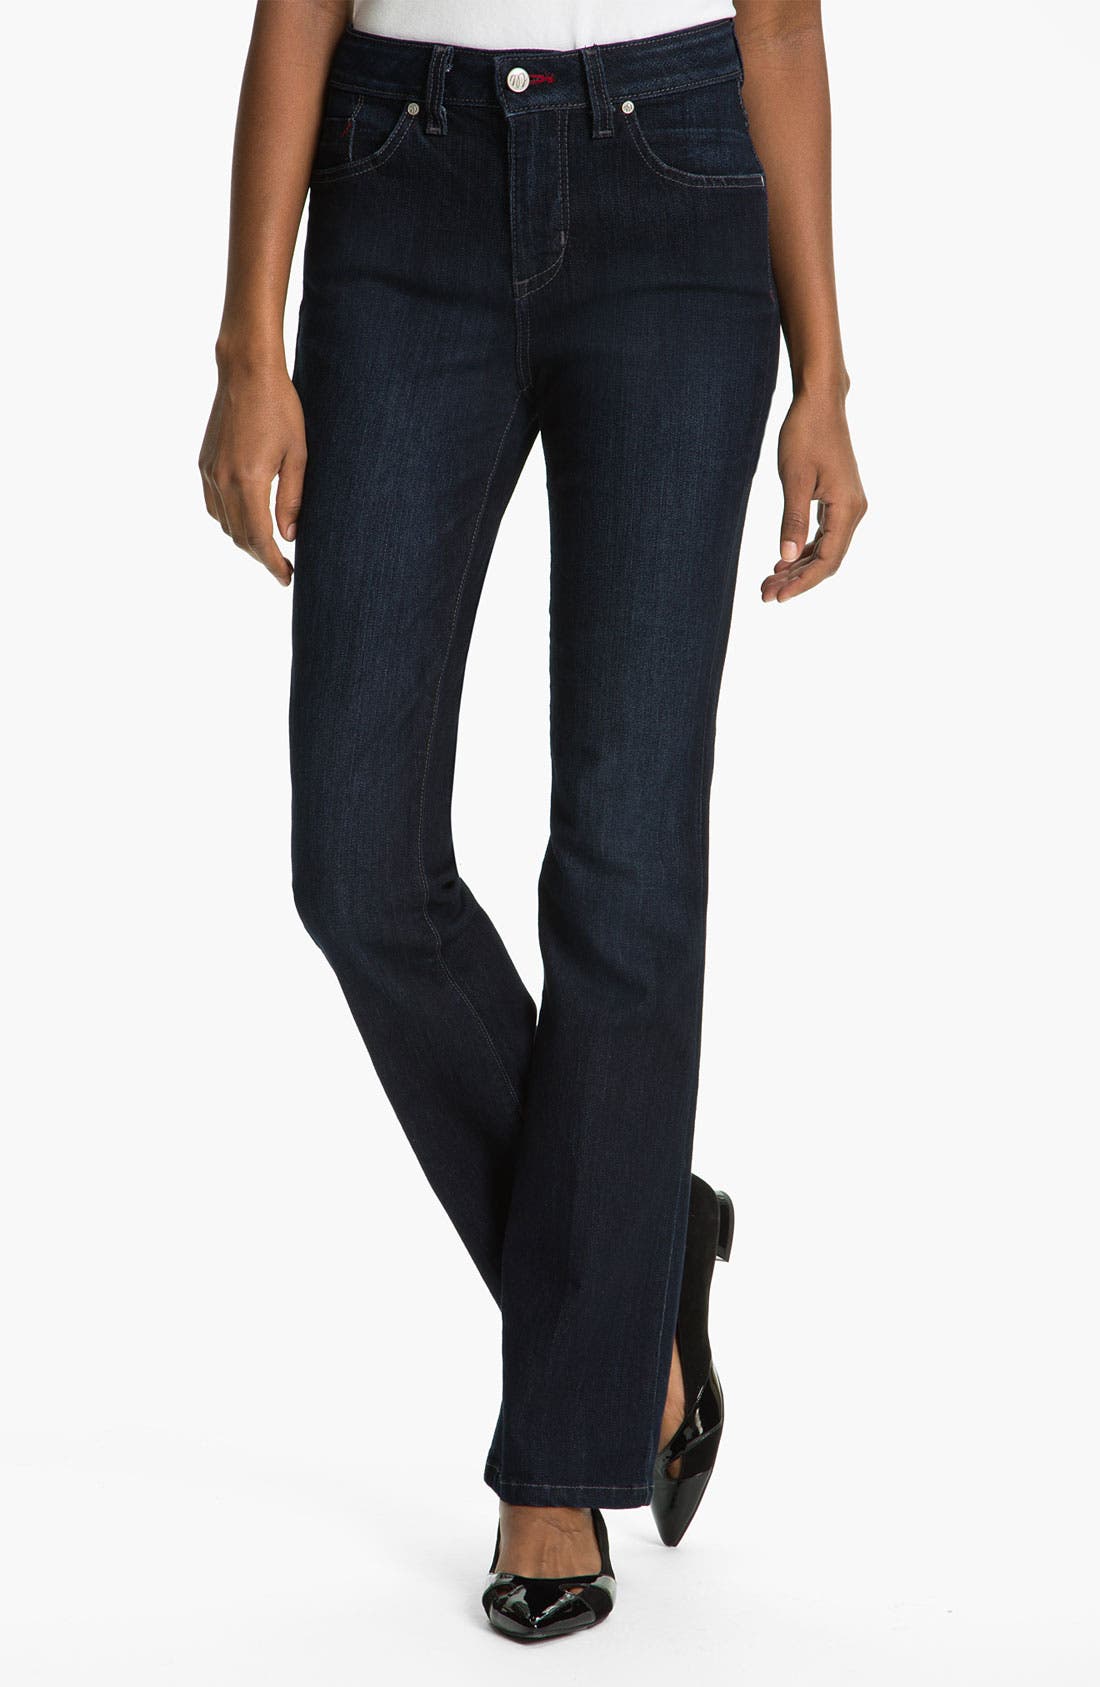 Miraclebody 'Betty' Bootcut Stretch 